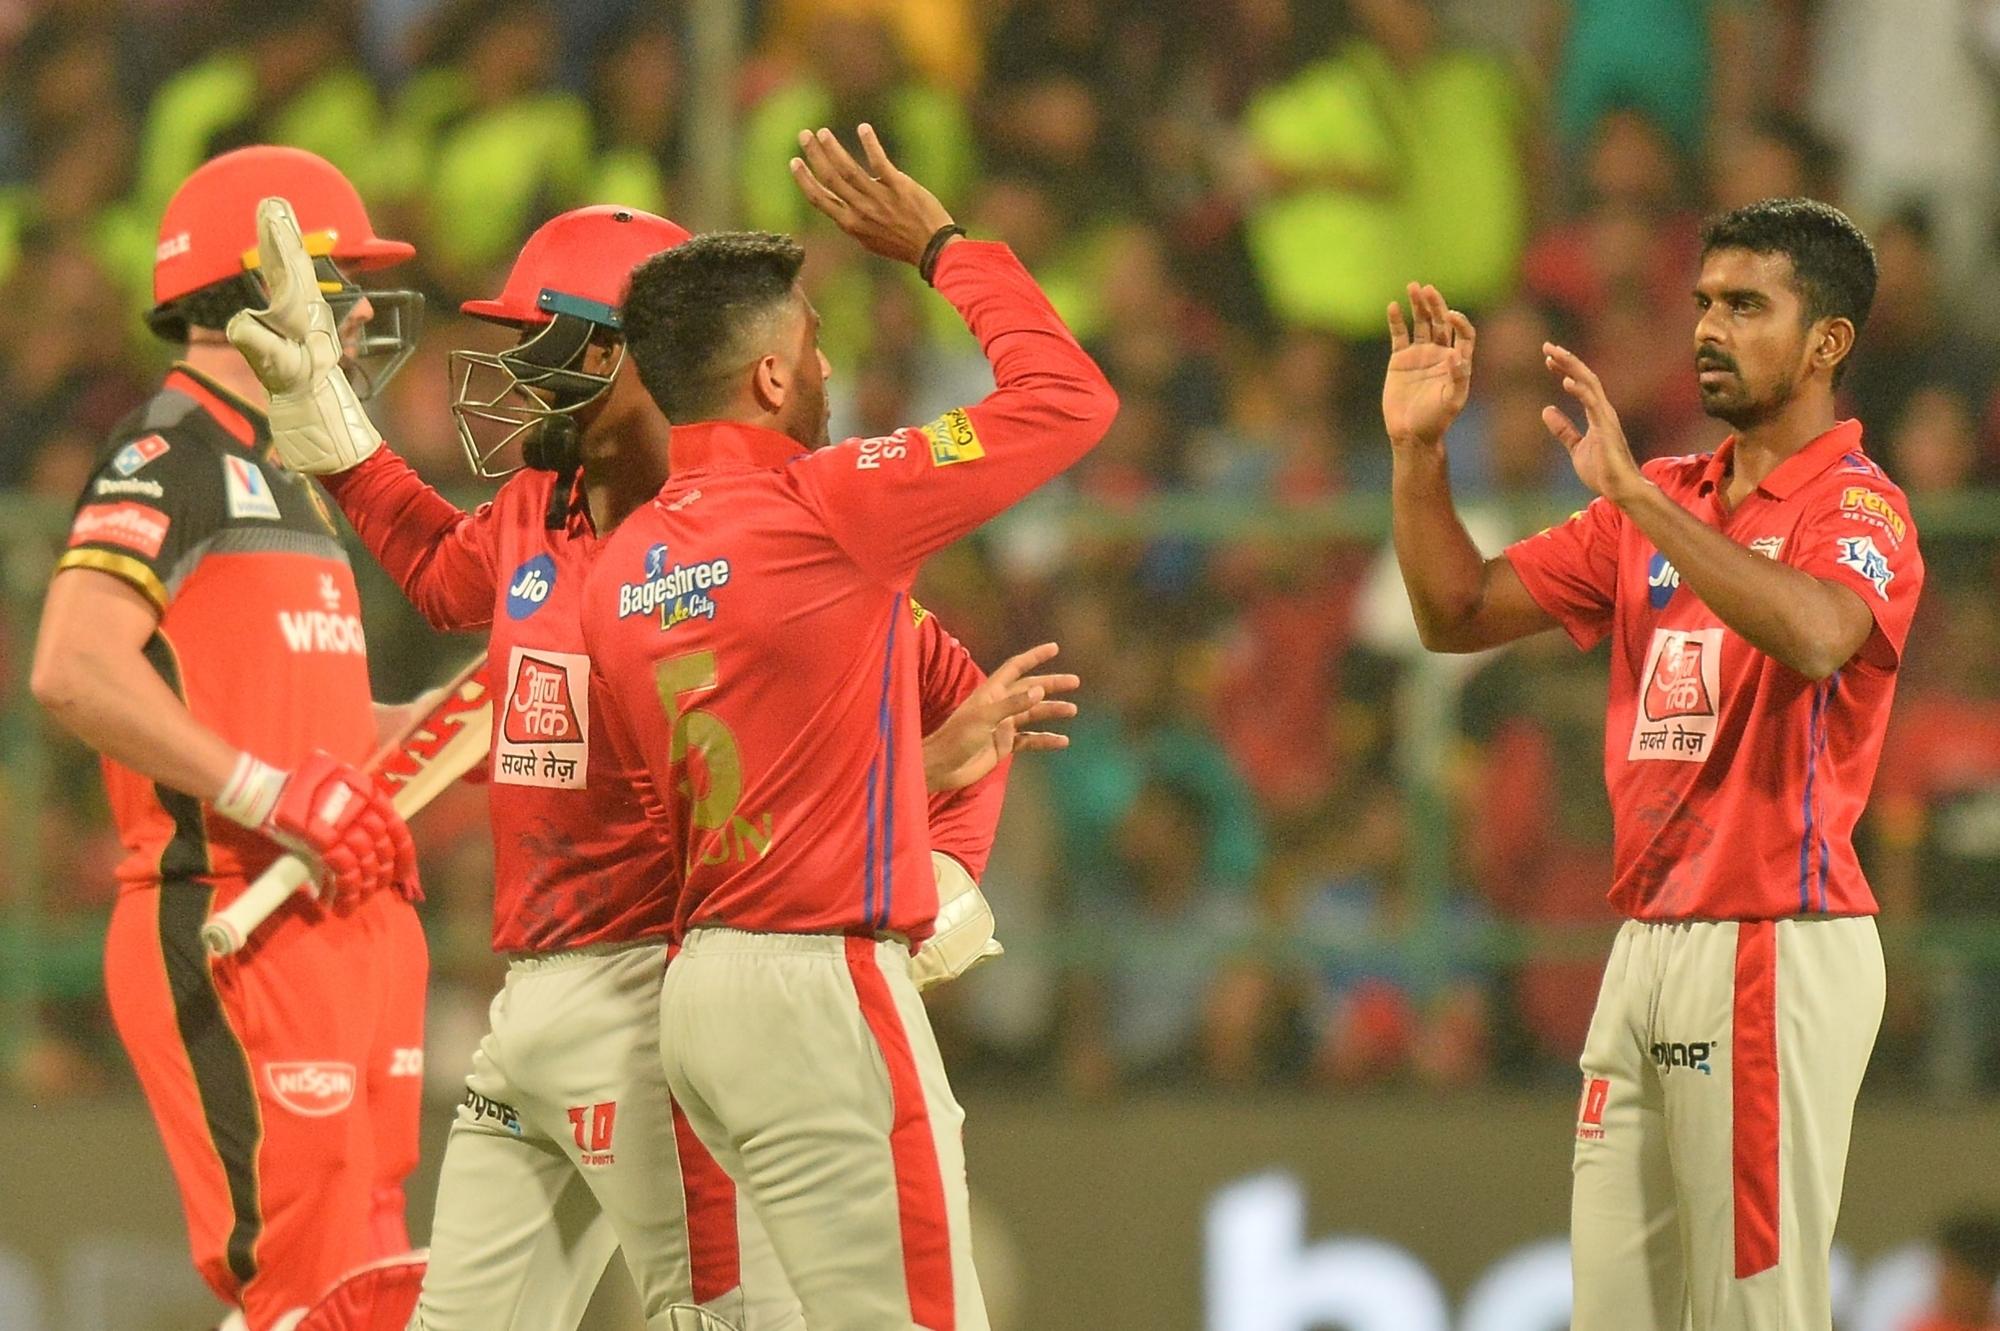 KXIP spinners did magic for the side against RCB | IANS File Photo